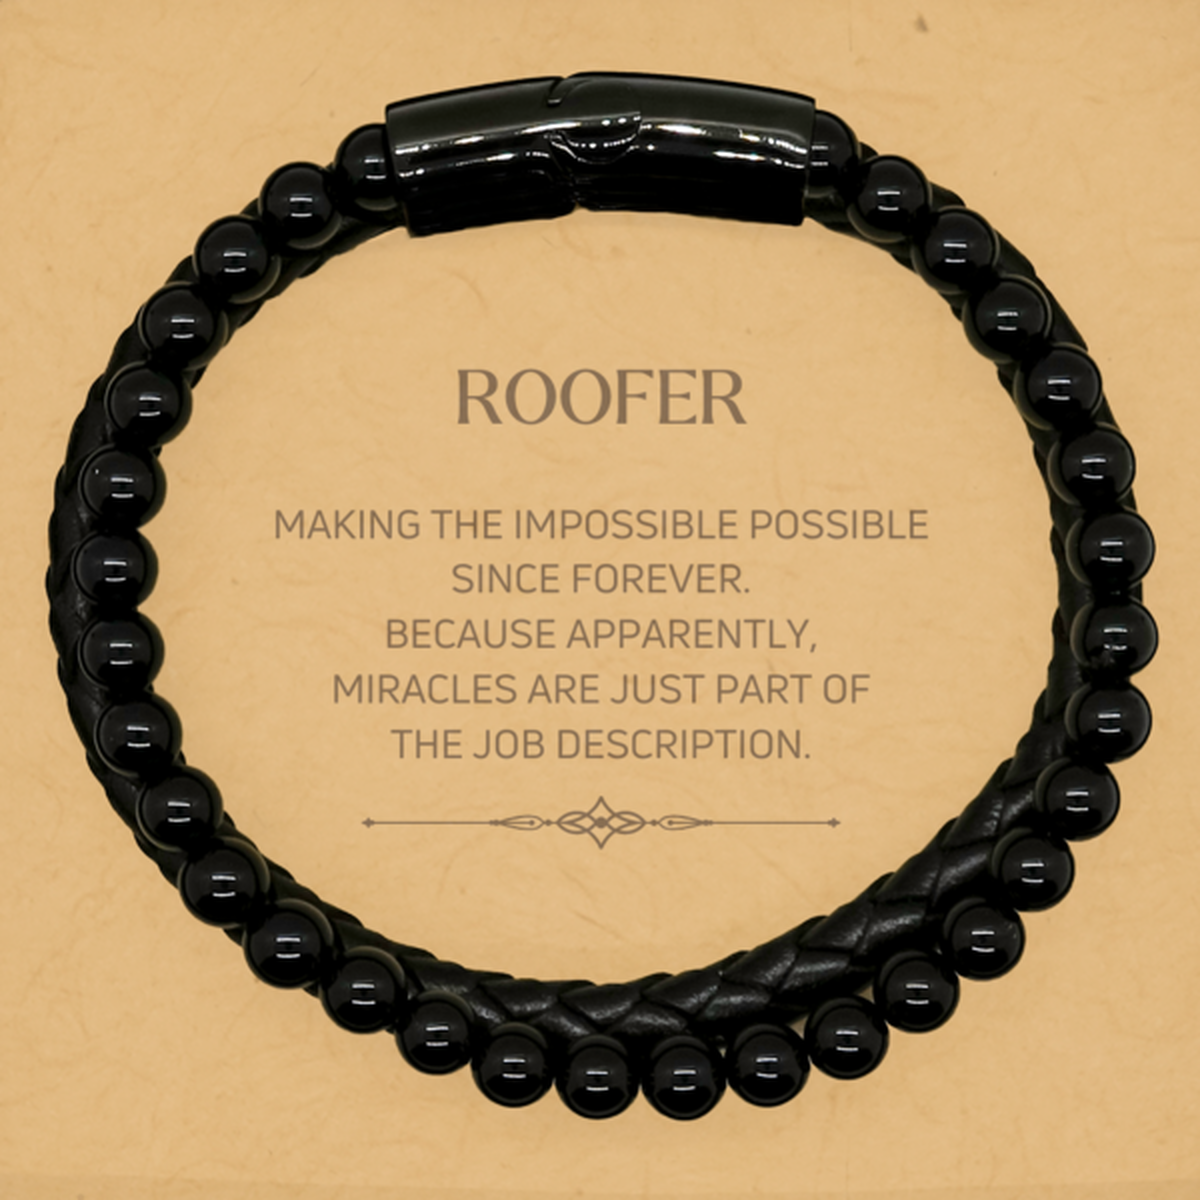 Funny Roofer Gifts, Miracles are just part of the job description, Inspirational Birthday Stone Leather Bracelets For Roofer, Men, Women, Coworkers, Friends, Boss